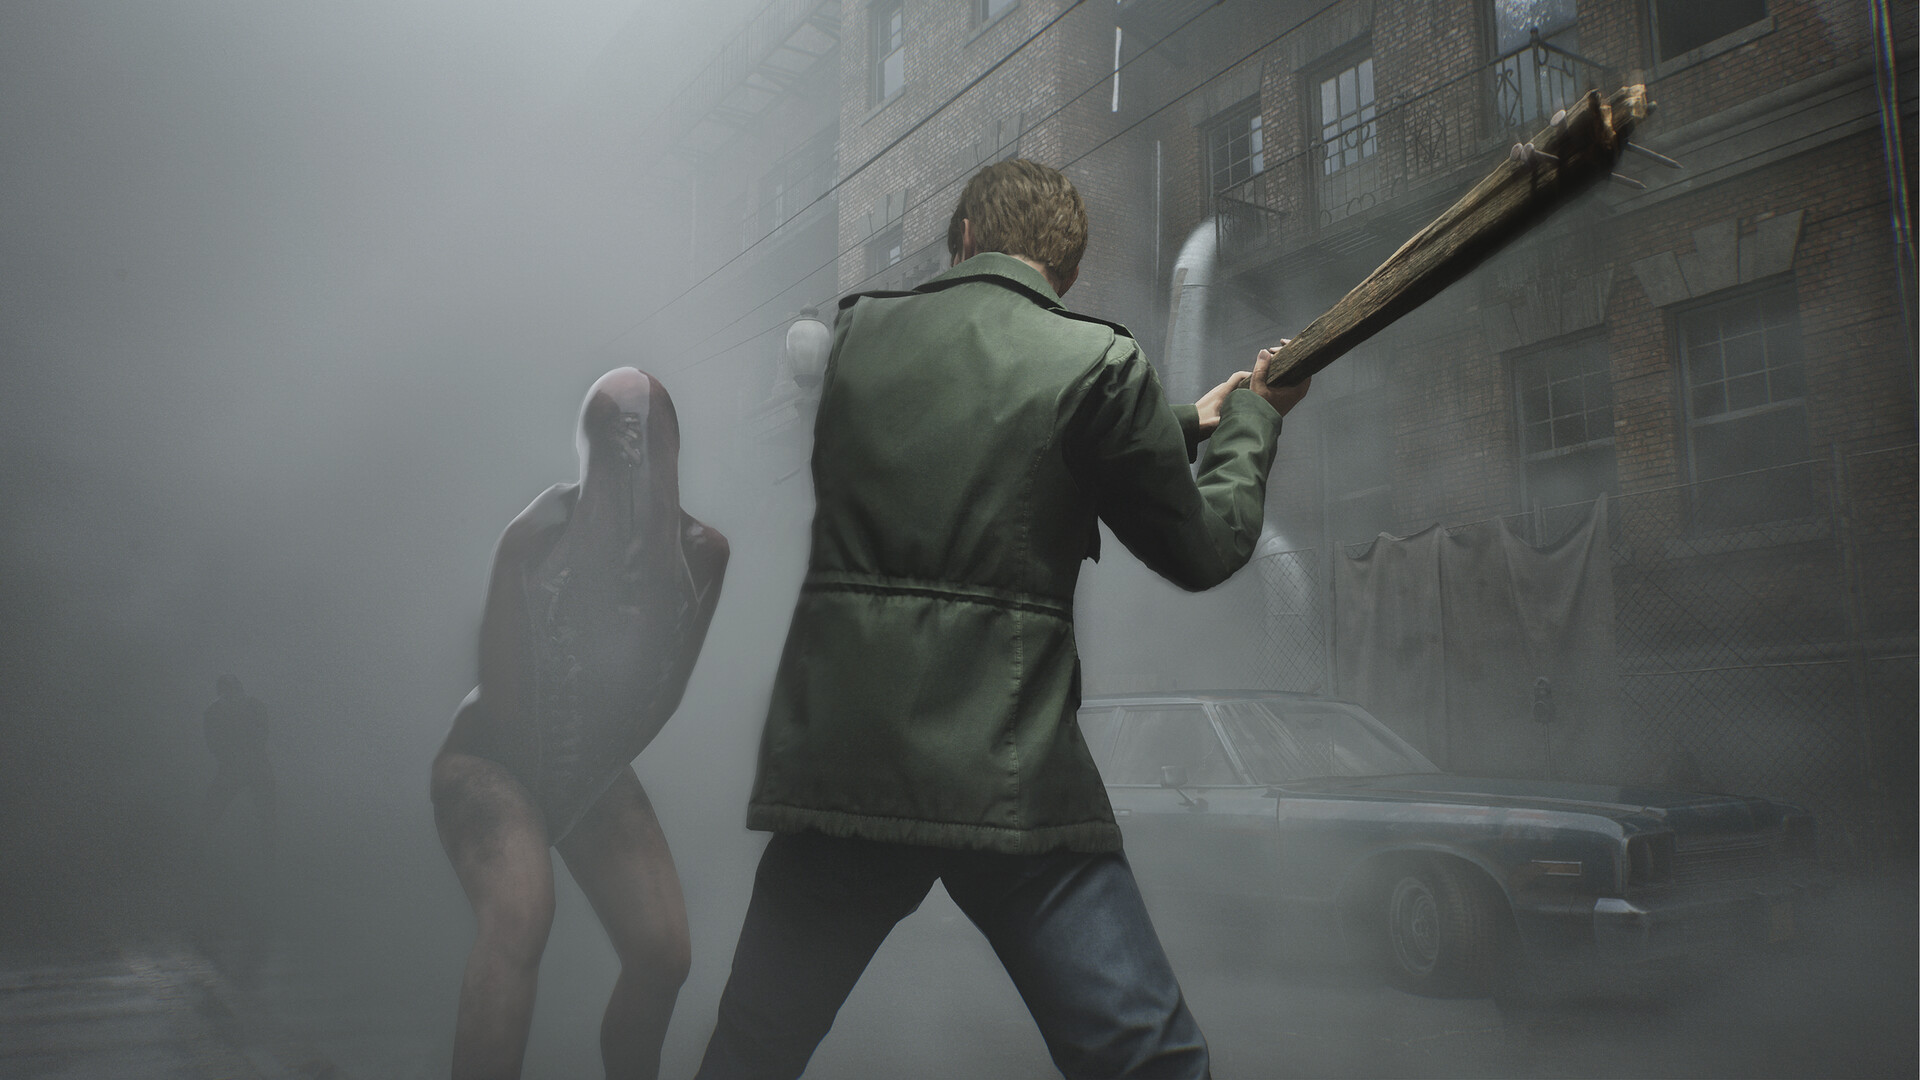 Silent Hill' Film Director May Have Confirmed the Long-Rumored